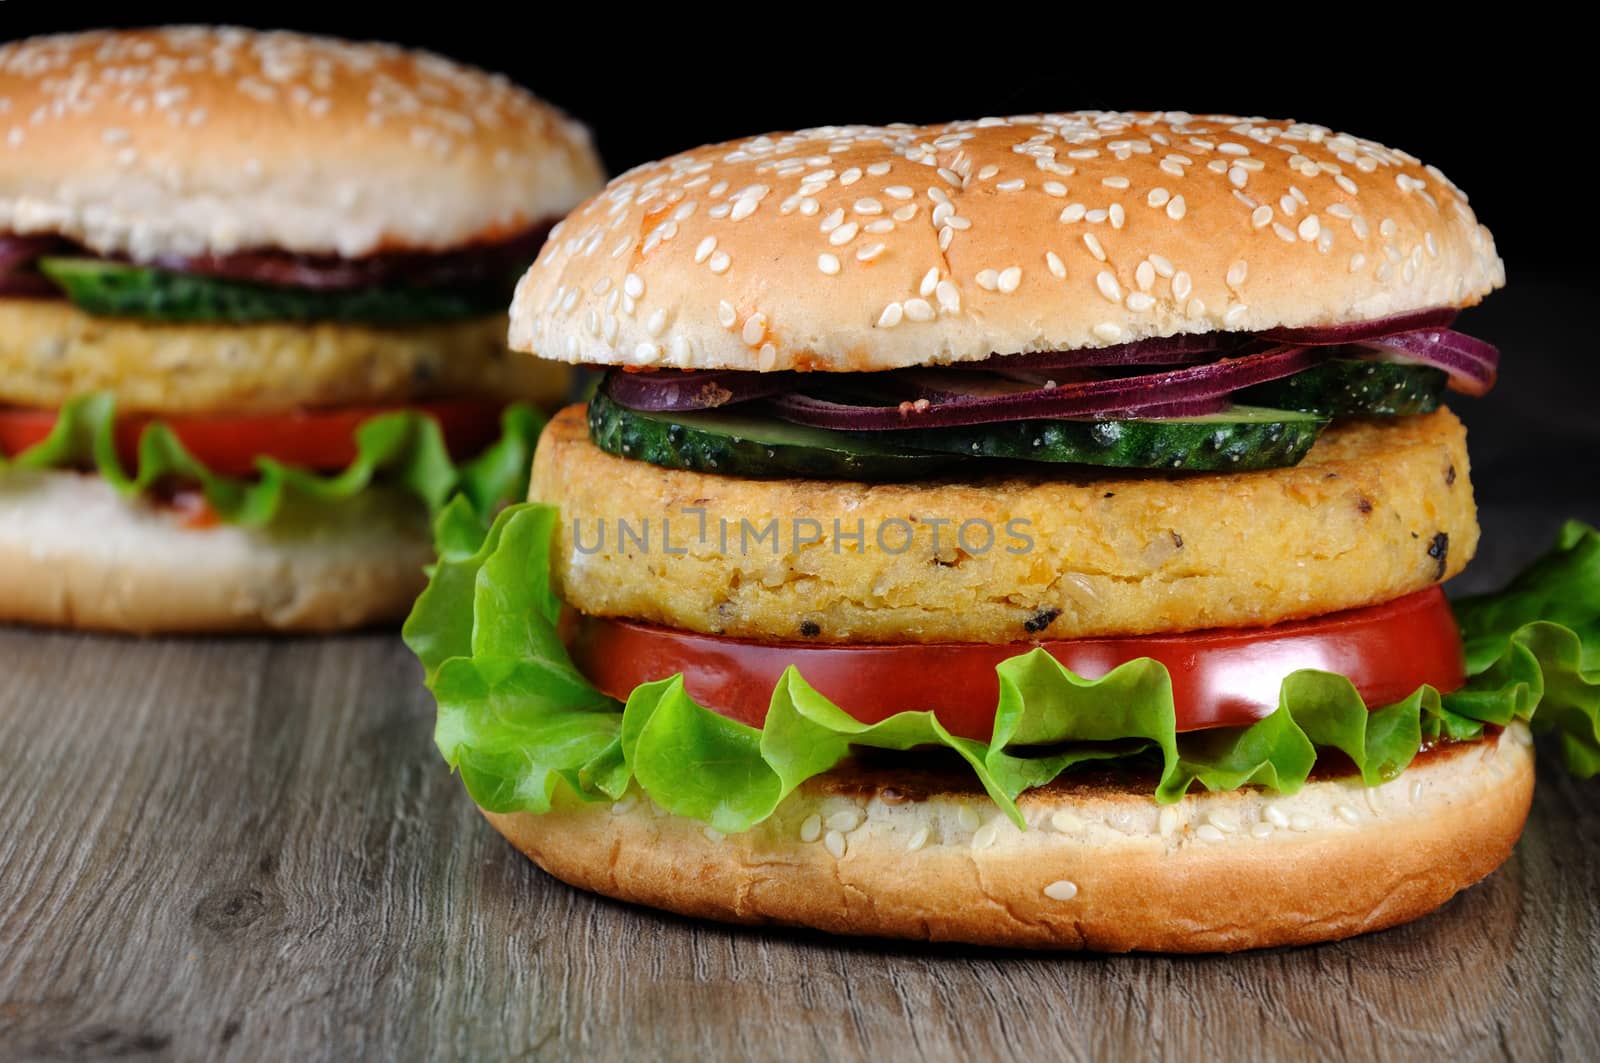 A simple and tasty dish of chickpeas or Nut Burger. by Apolonia